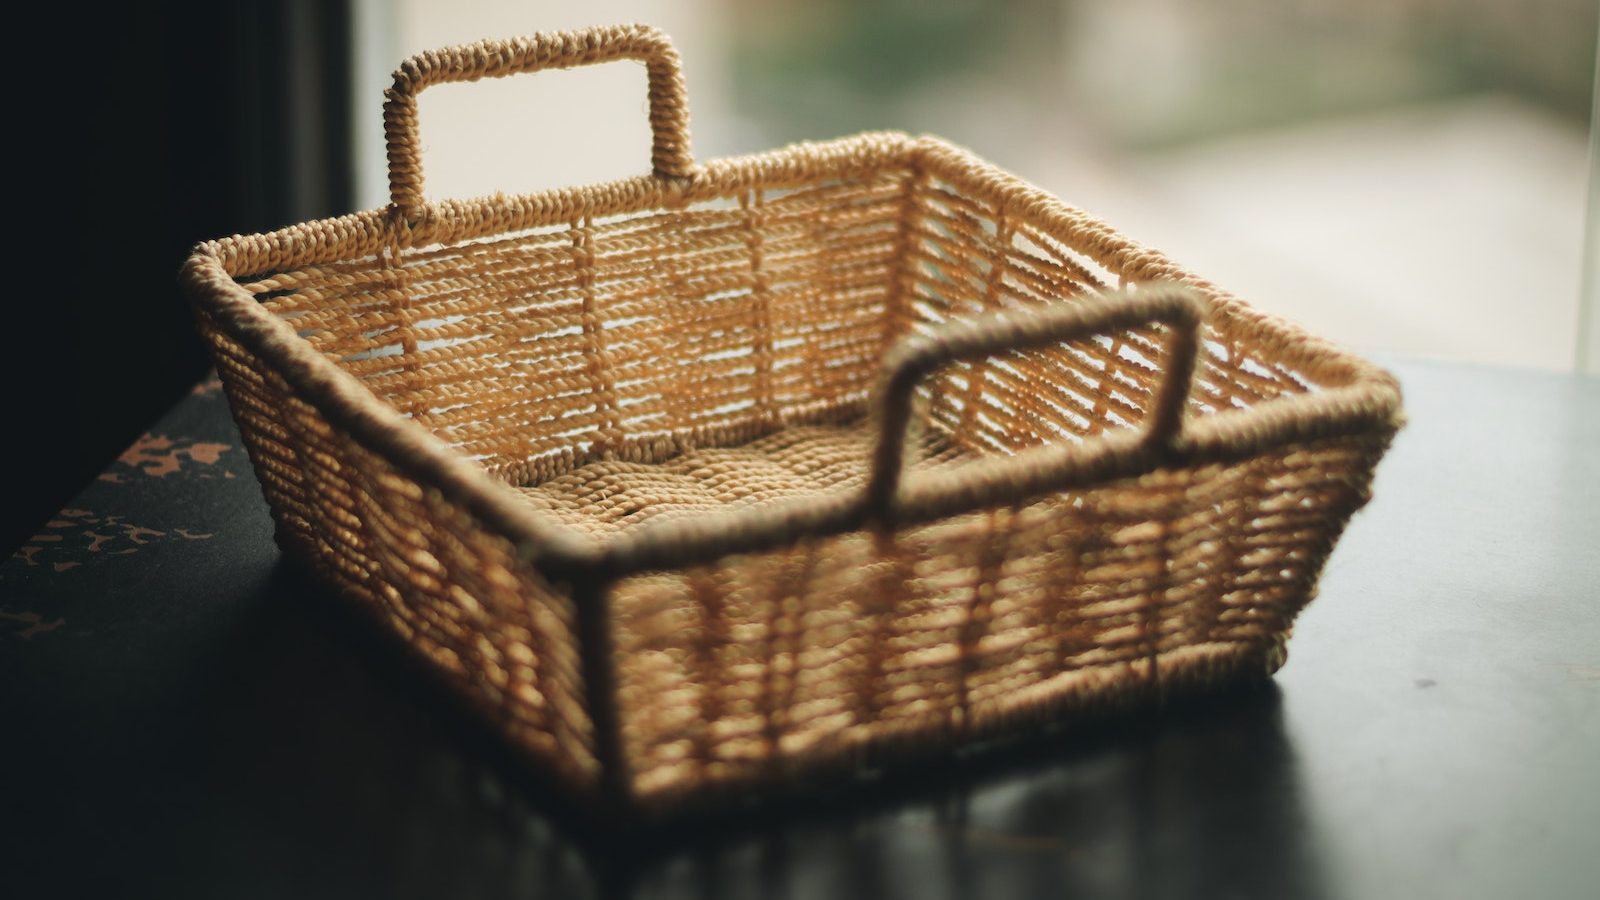 Square Brown Wicker Basket on Table